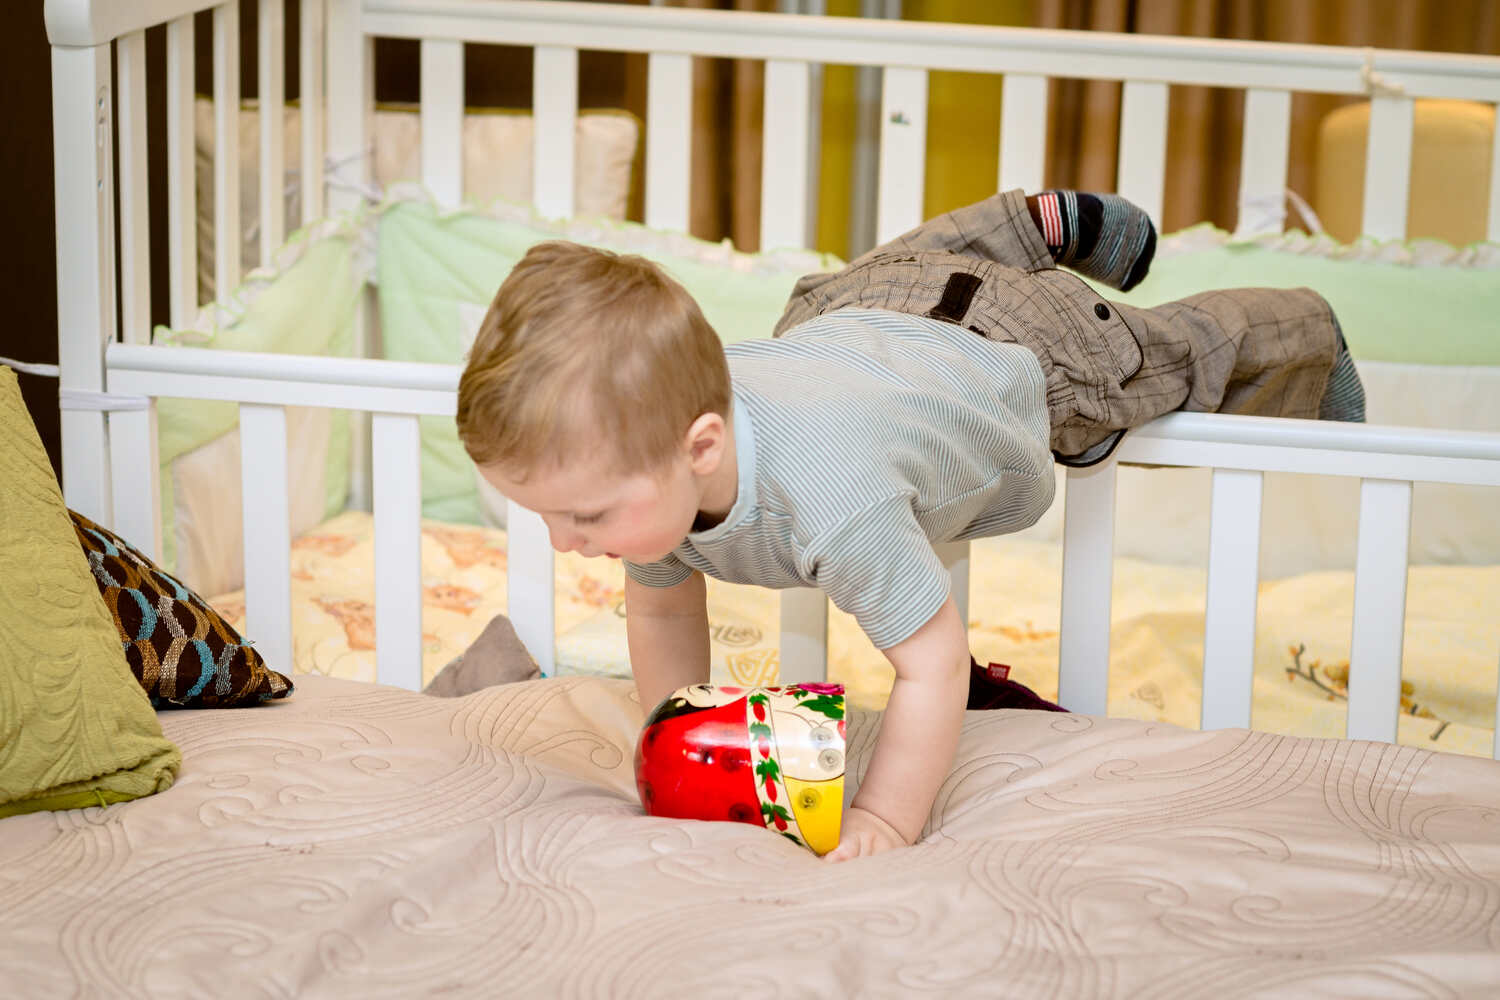 Rearranging furniture will prevent toddler climbing